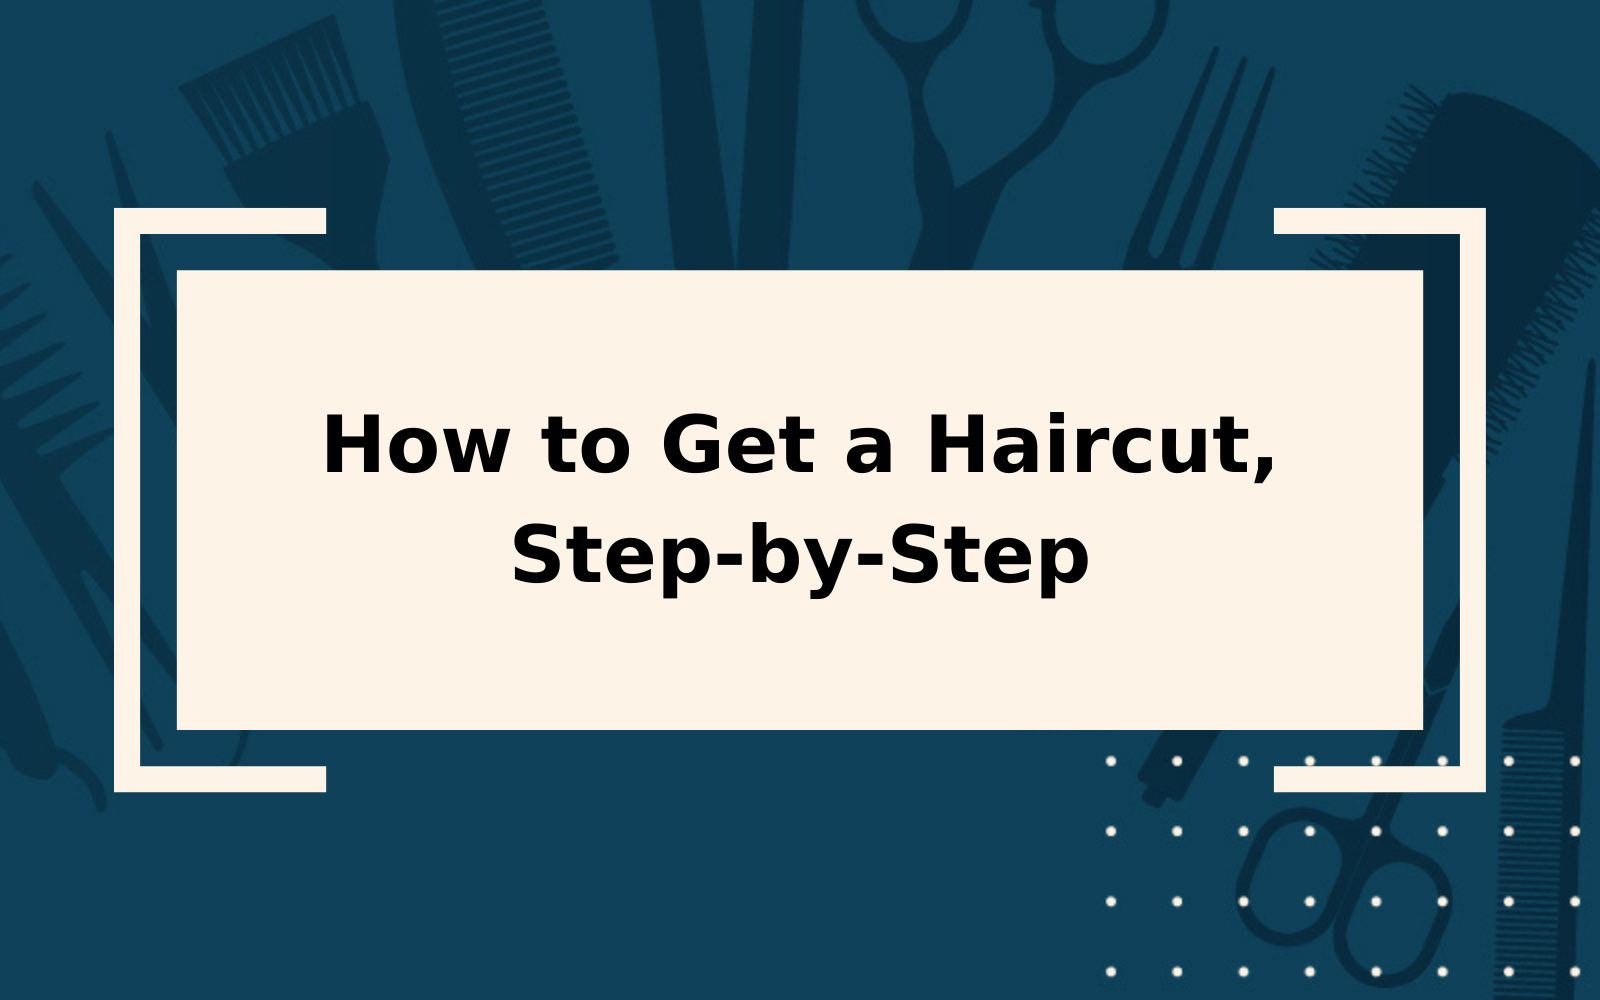 How to Get a Haircut | Step-by-Step Guide